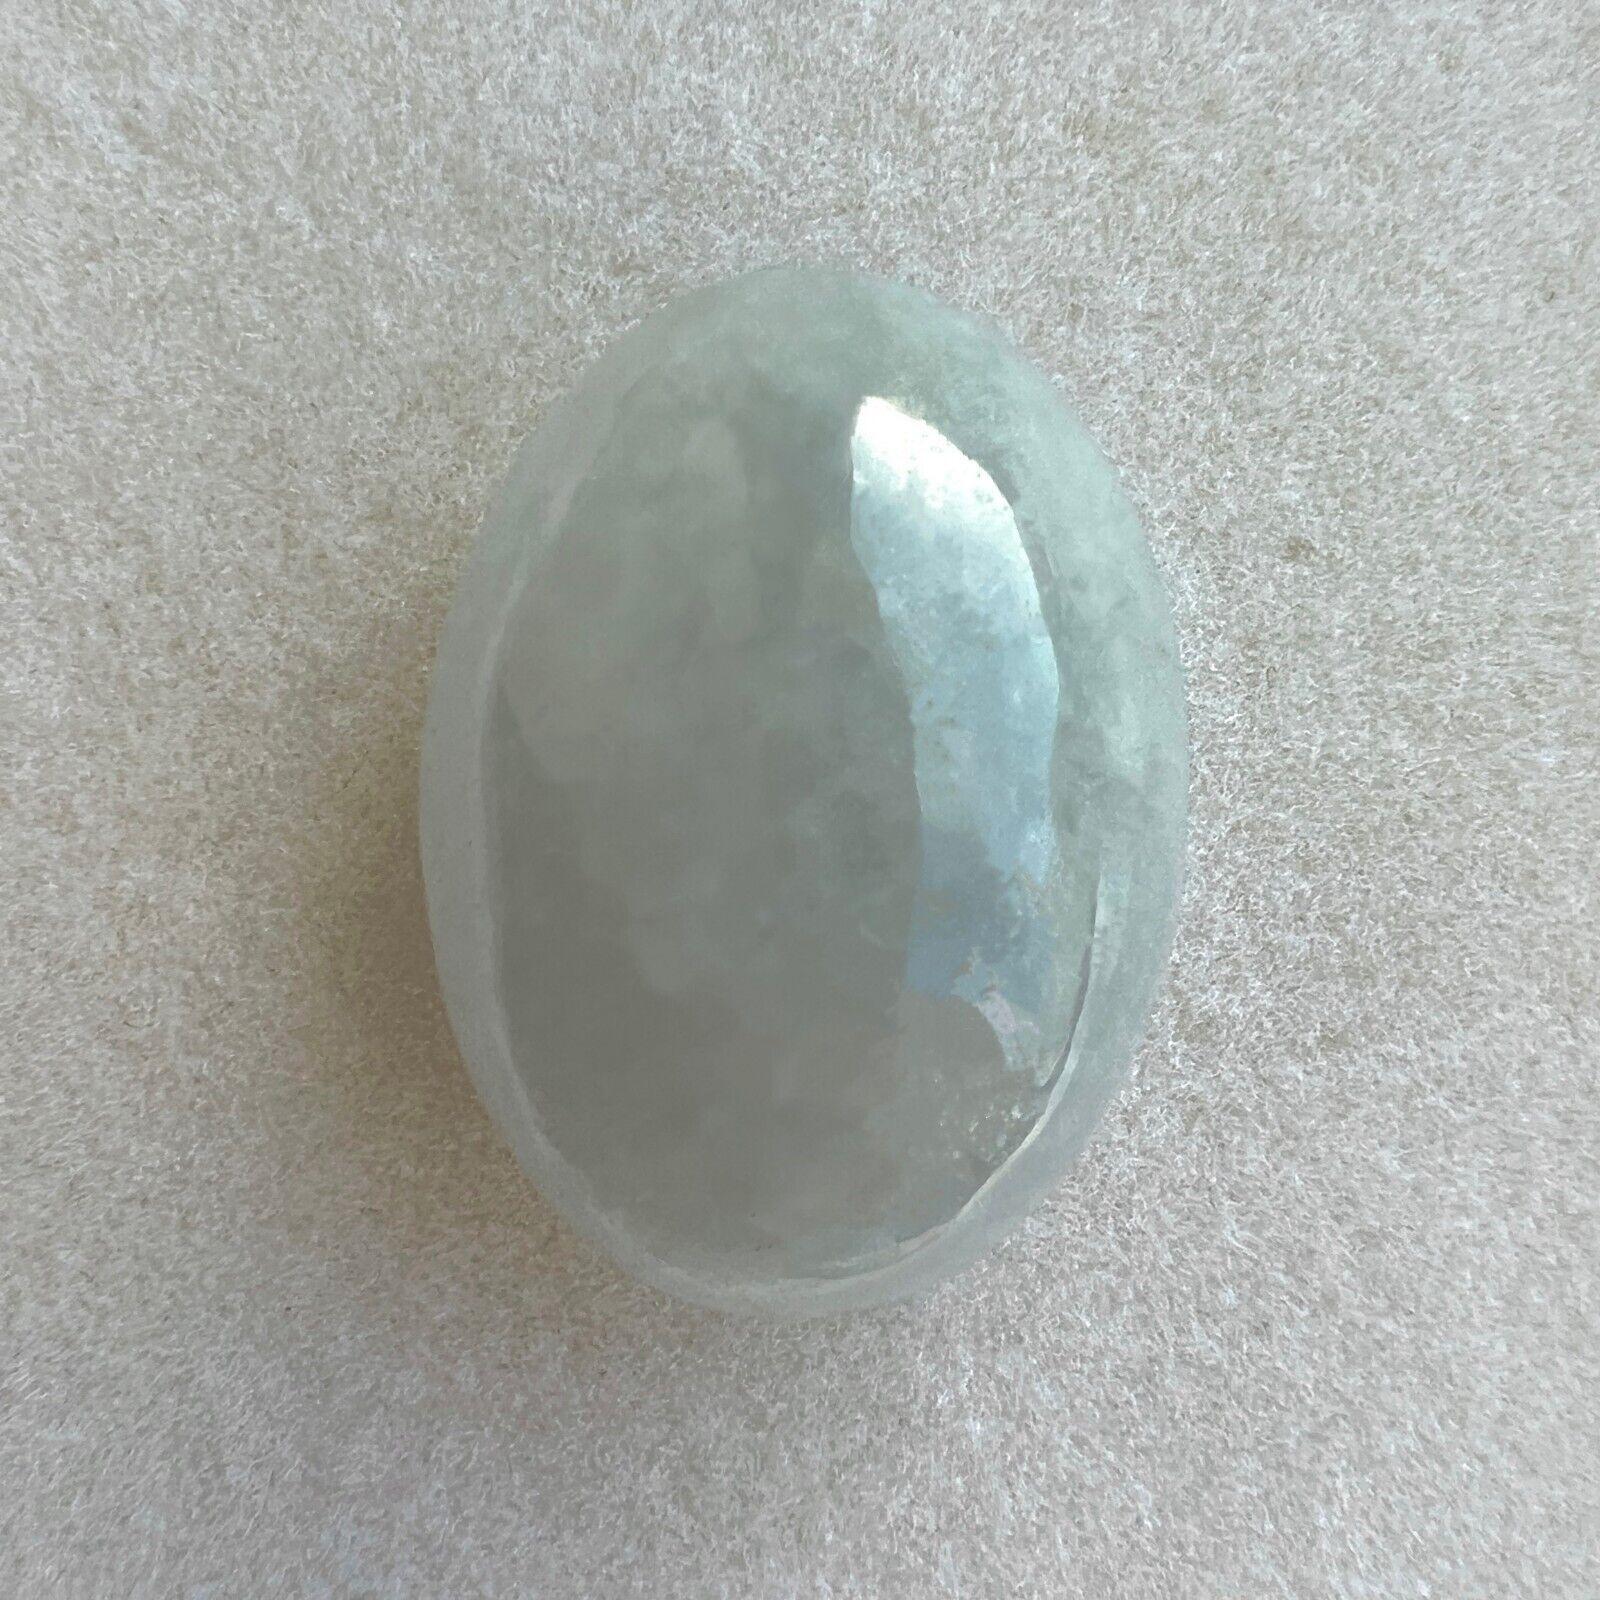 27.15Ct IGI Certified Grey White 'ice' Jadeite Jade ‘A’ Grade Cabochon Untreated

IGI Certified Untreated A Grade Grey White Jadeite Gemstone.
27.15 Carat with an excellent oval cabochon cut and grey white colour. Fully certified by IGI in